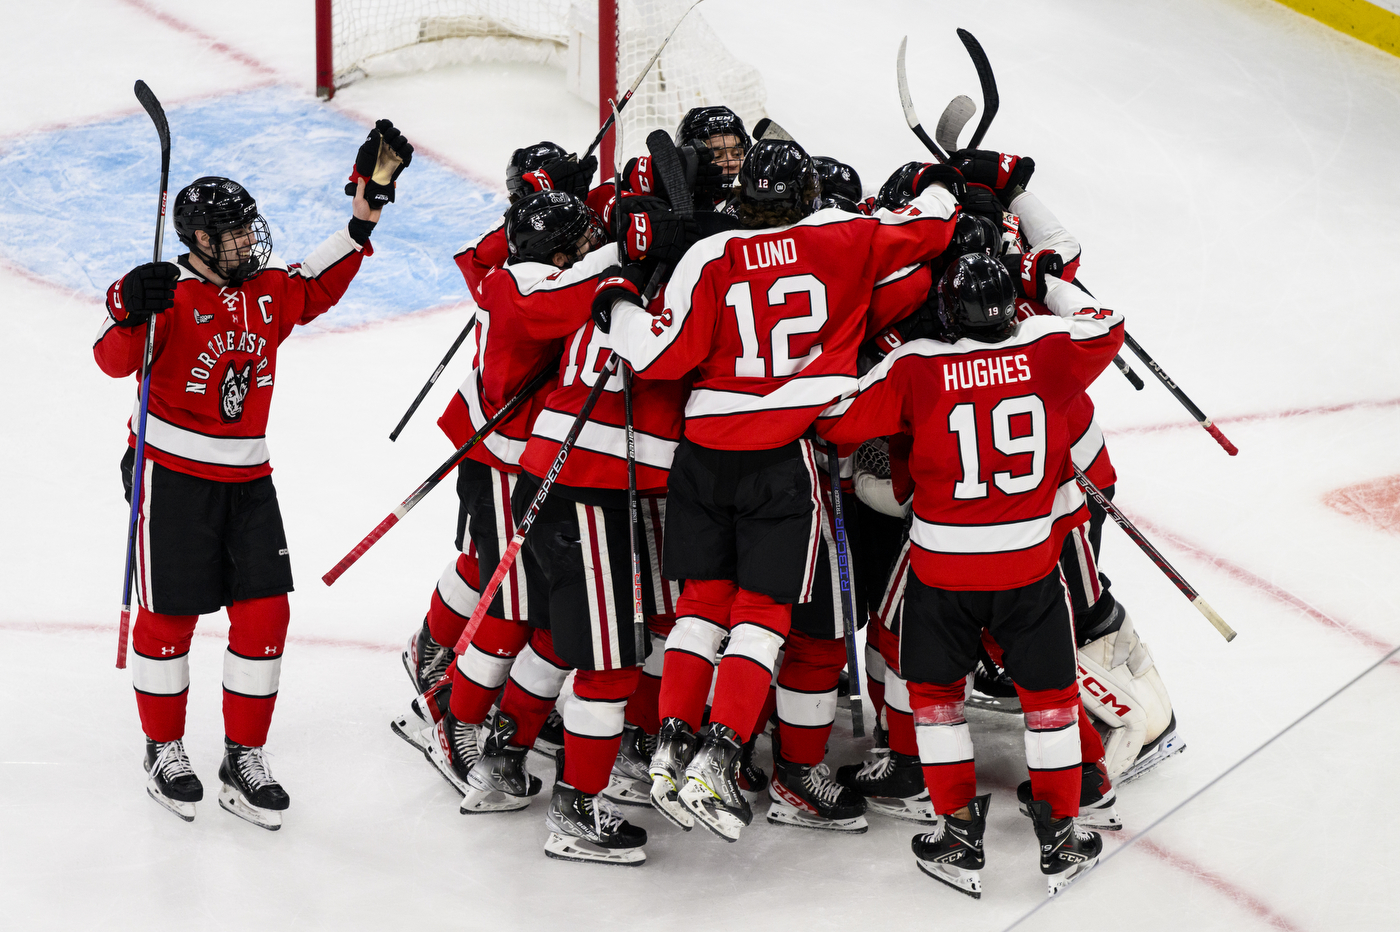 A group of Northeastern hockey players celebrate a win together on the ice.